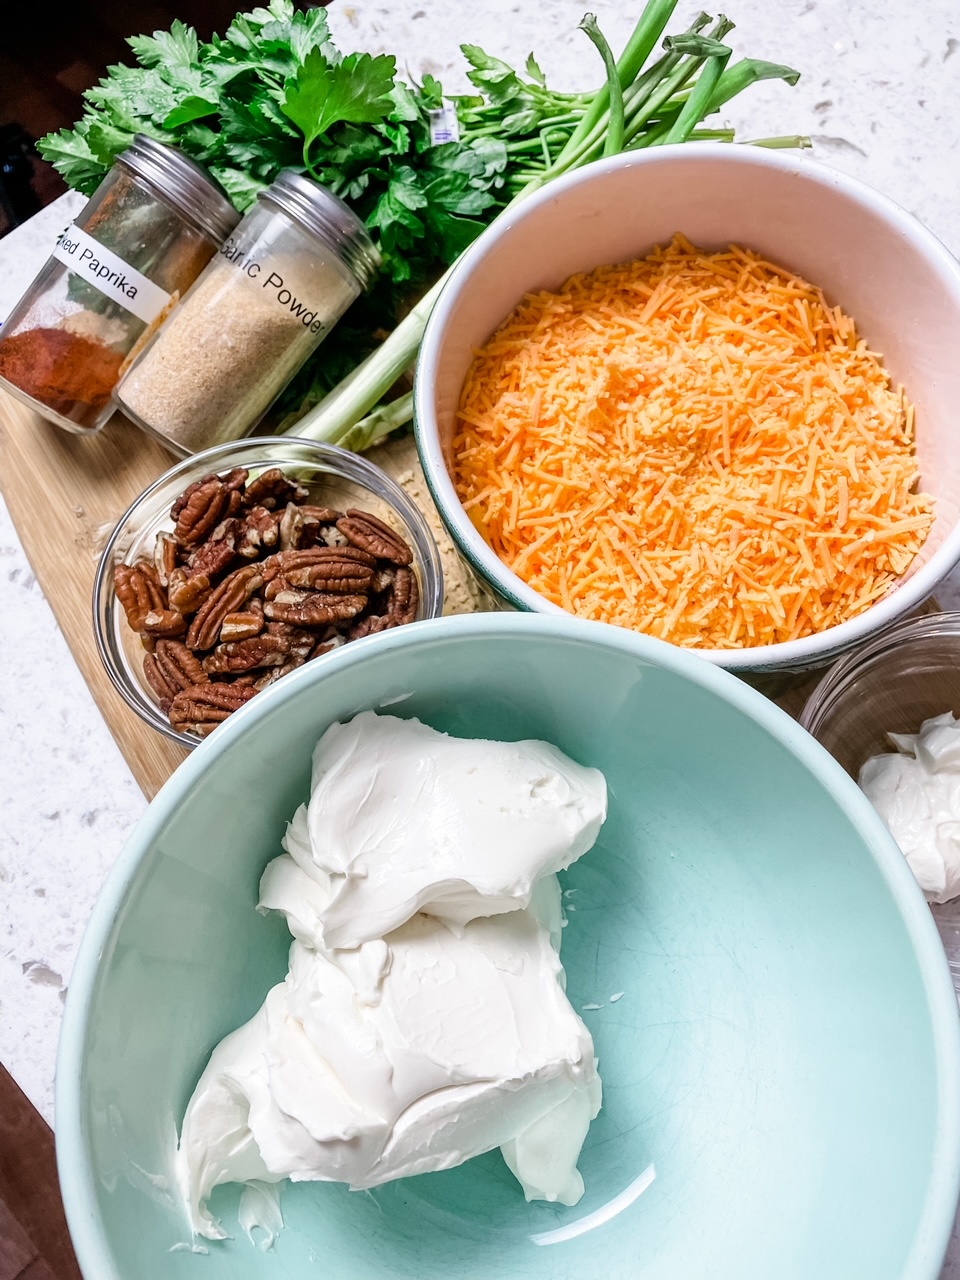 The ingredients for the Best Holiday Cheese Ball - cream cheese, spices, and cheddar cheese